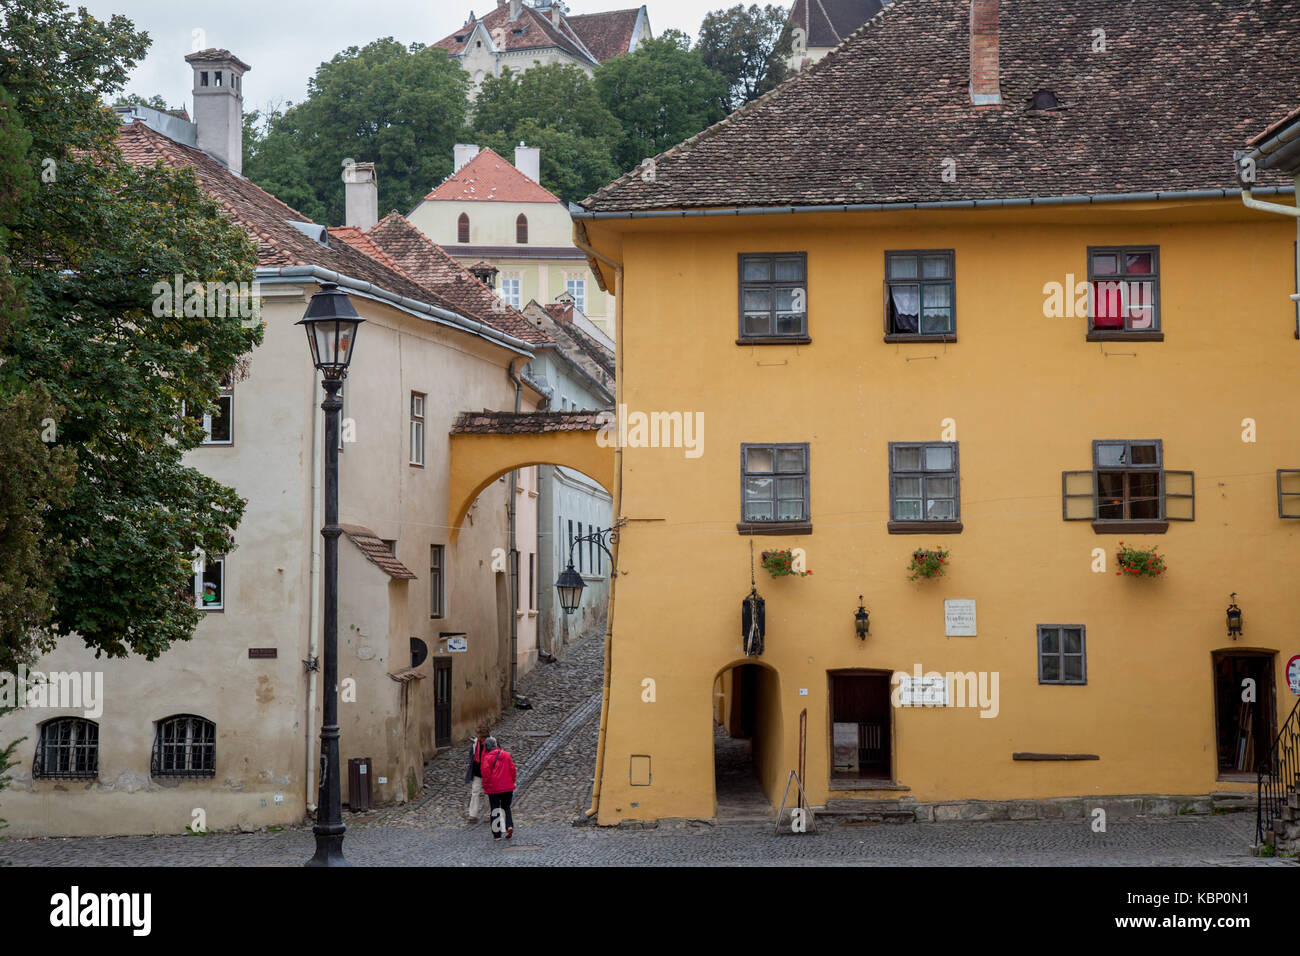 SIGHISOARA, ROMANIA - SEPTEMBER 22, 2017: Picture of the house where Vlad Tepes, aka Vlad Dracul or Dracula was allegedly born in the 14th, in Sighiso Stock Photo